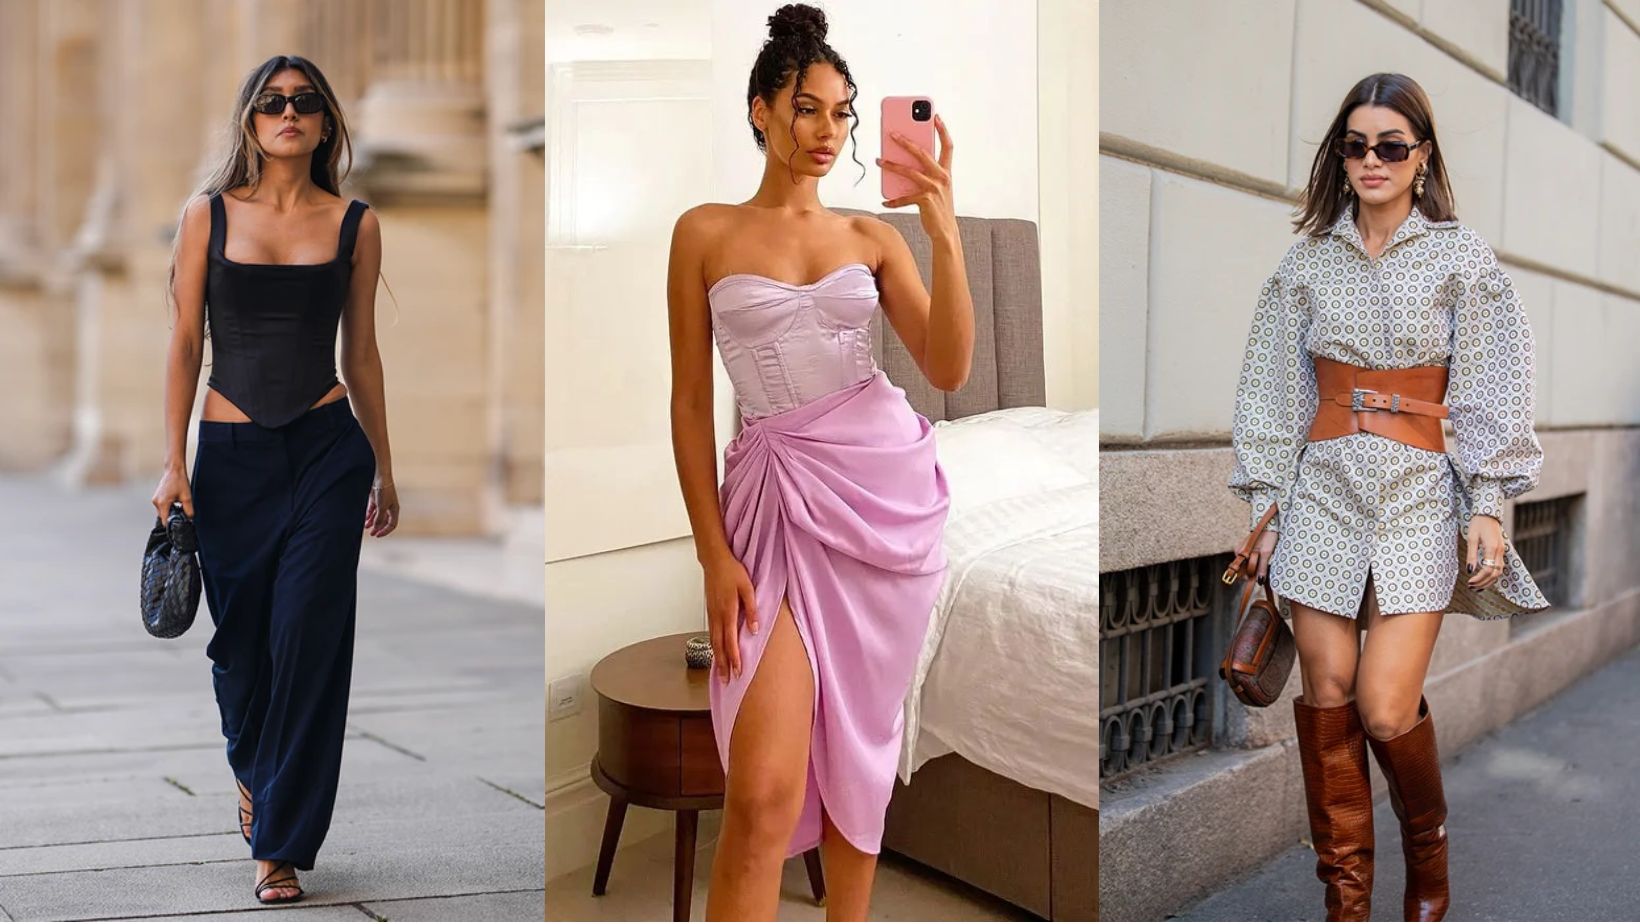 How To Wear Corsets, Corset Fashion Trends